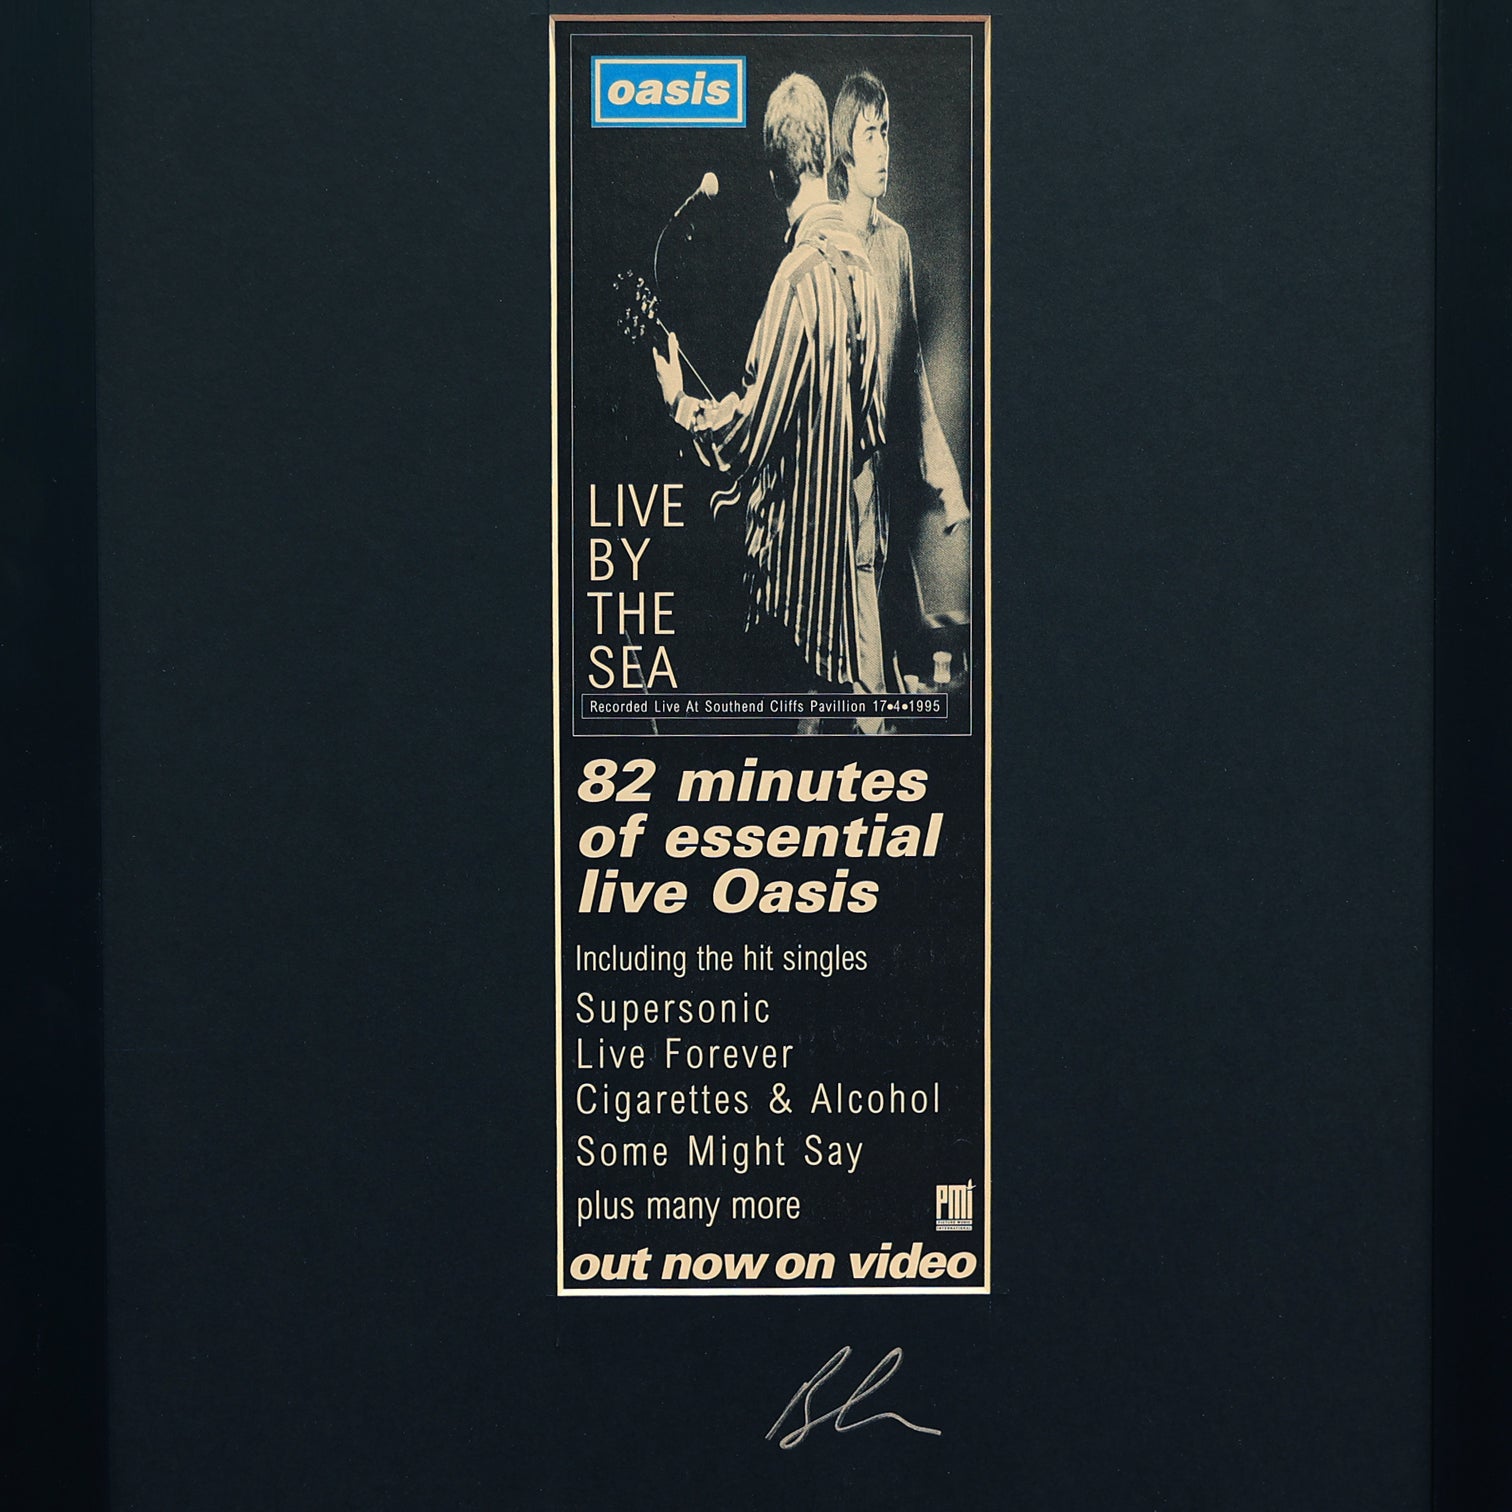 Oasis - Live By The Sea - Original Framed Press AD - New Item